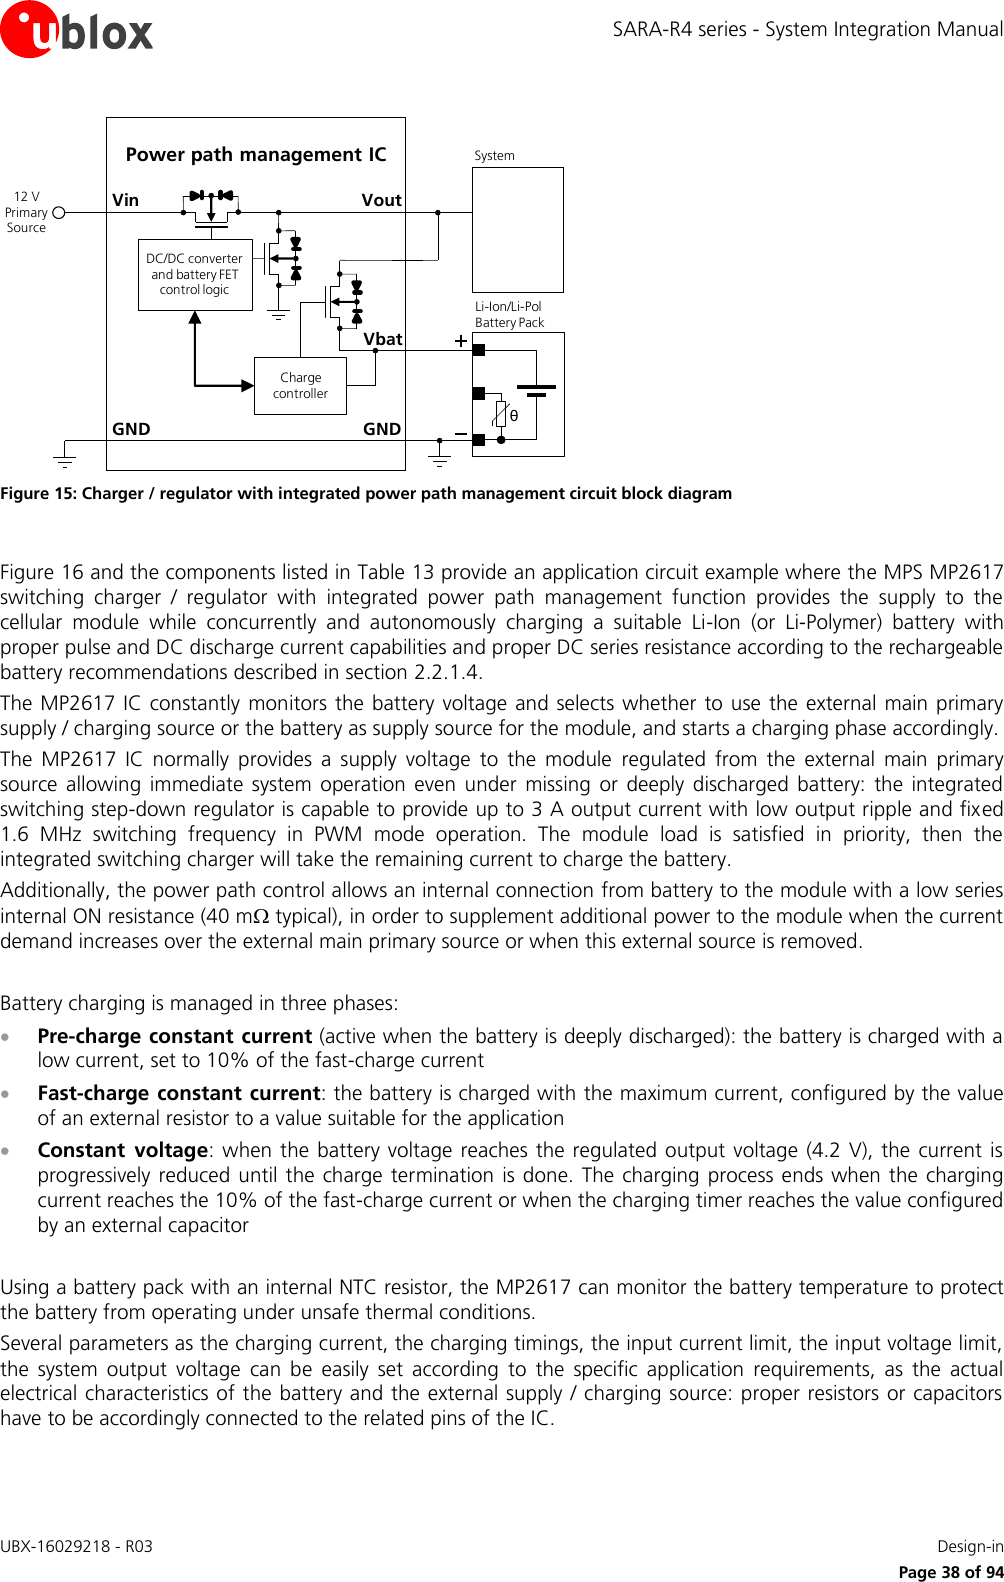 SARA-R4 series - System Integration Manual UBX-16029218 - R03    Design-in     Page 38 of 94 GNDPower path management ICVoutVinθLi-Ion/Li-Pol Battery PackGNDSystem12 V Primary SourceCharge controllerDC/DC converter and battery FET control logicVbat Figure 15: Charger / regulator with integrated power path management circuit block diagram  Figure 16 and the components listed in Table 13 provide an application circuit example where the MPS MP2617 switching  charger  /  regulator  with  integrated  power  path  management  function  provides  the  supply  to  the cellular  module  while  concurrently  and  autonomously  charging  a  suitable  Li-Ion  (or  Li-Polymer)  battery  with proper pulse and DC discharge current capabilities and proper DC series resistance according to the rechargeable battery recommendations described in section 2.2.1.4. The MP2617 IC constantly  monitors the battery voltage and selects whether  to  use the external main primary supply / charging source or the battery as supply source for the module, and starts a charging phase accordingly.  The  MP2617  IC  normally  provides  a  supply  voltage  to  the  module  regulated  from  the  external  main  primary source  allowing  immediate  system operation  even  under  missing  or  deeply  discharged  battery:  the  integrated switching step-down regulator is capable to provide up to 3 A output current with low output ripple and fixed 1.6  MHz  switching  frequency  in  PWM  mode  operation.  The  module  load  is  satisfied  in  priority,  then  the integrated switching charger will take the remaining current to charge the battery. Additionally, the power path control allows an internal connection from battery to the module with a low series internal ON resistance (40 m typical), in order to supplement additional power to the module when the current demand increases over the external main primary source or when this external source is removed.  Battery charging is managed in three phases:  Pre-charge constant current (active when the battery is deeply discharged): the battery is charged with a low current, set to 10% of the fast-charge current  Fast-charge constant current: the battery is charged with the maximum current, configured by the value of an external resistor to a value suitable for the application  Constant  voltage: when  the battery voltage reaches  the regulated output  voltage  (4.2  V),  the current  is progressively reduced  until the charge  termination is done. The  charging process ends when the charging current reaches the 10% of the fast-charge current or when the charging timer reaches the value configured by an external capacitor  Using a battery pack with an internal NTC resistor, the MP2617 can monitor the battery temperature to protect the battery from operating under unsafe thermal conditions. Several parameters as the charging current, the charging timings, the input current limit, the input voltage limit, the  system  output  voltage  can  be  easily  set  according  to  the  specific  application  requirements,  as  the  actual electrical characteristics of the battery and the external supply / charging source: proper resistors or capacitors have to be accordingly connected to the related pins of the IC.  